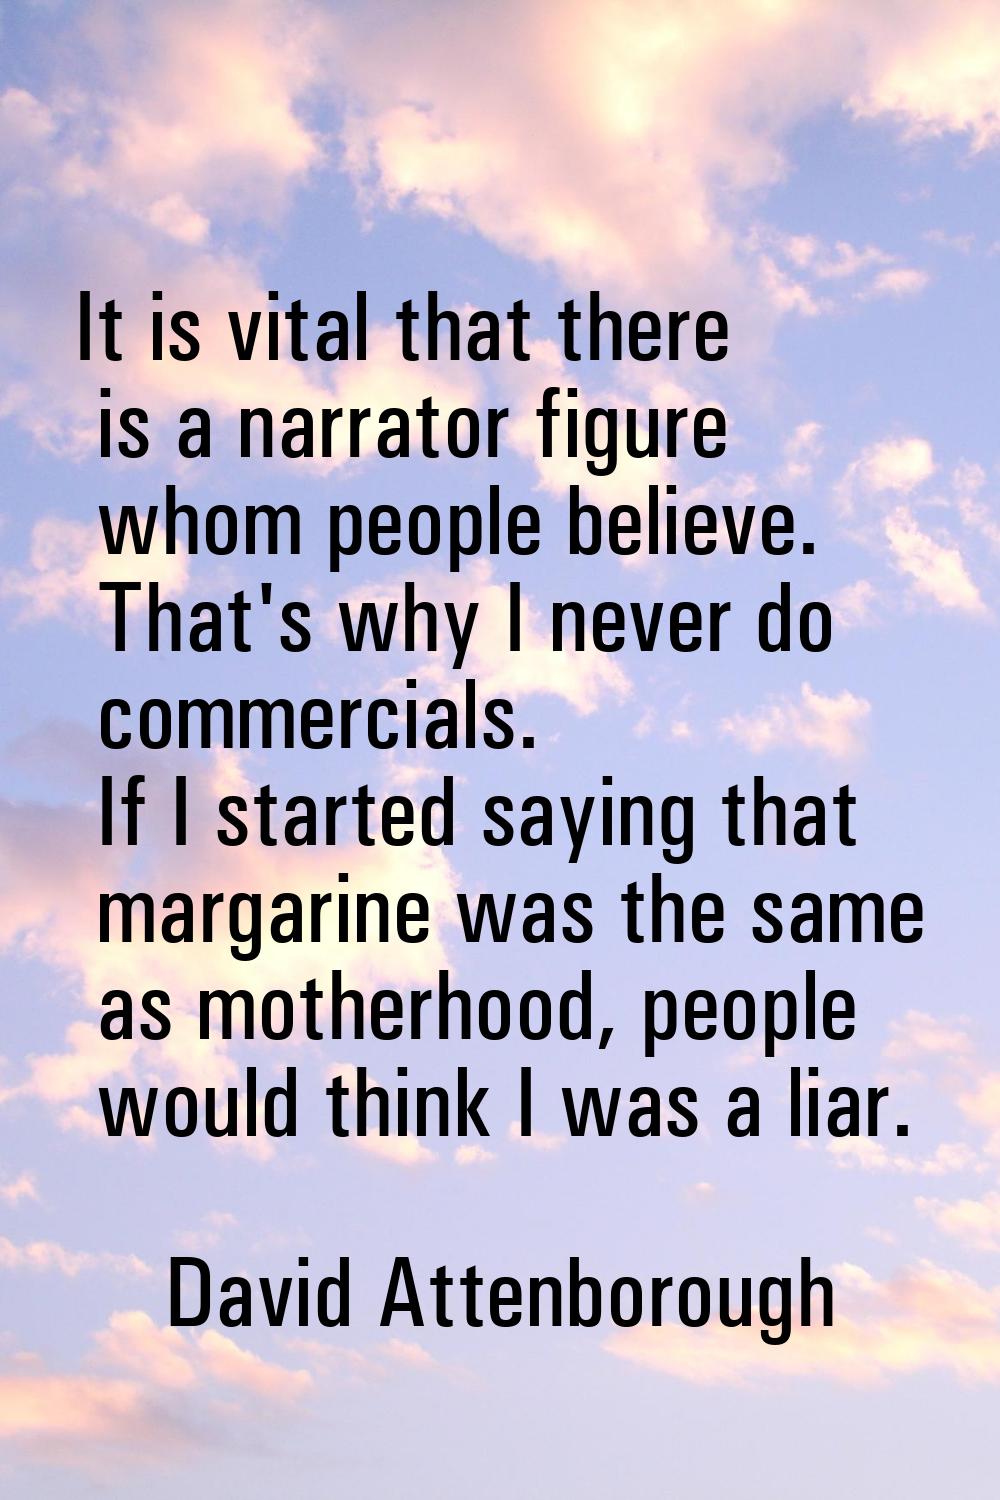 It is vital that there is a narrator figure whom people believe. That's why I never do commercials.